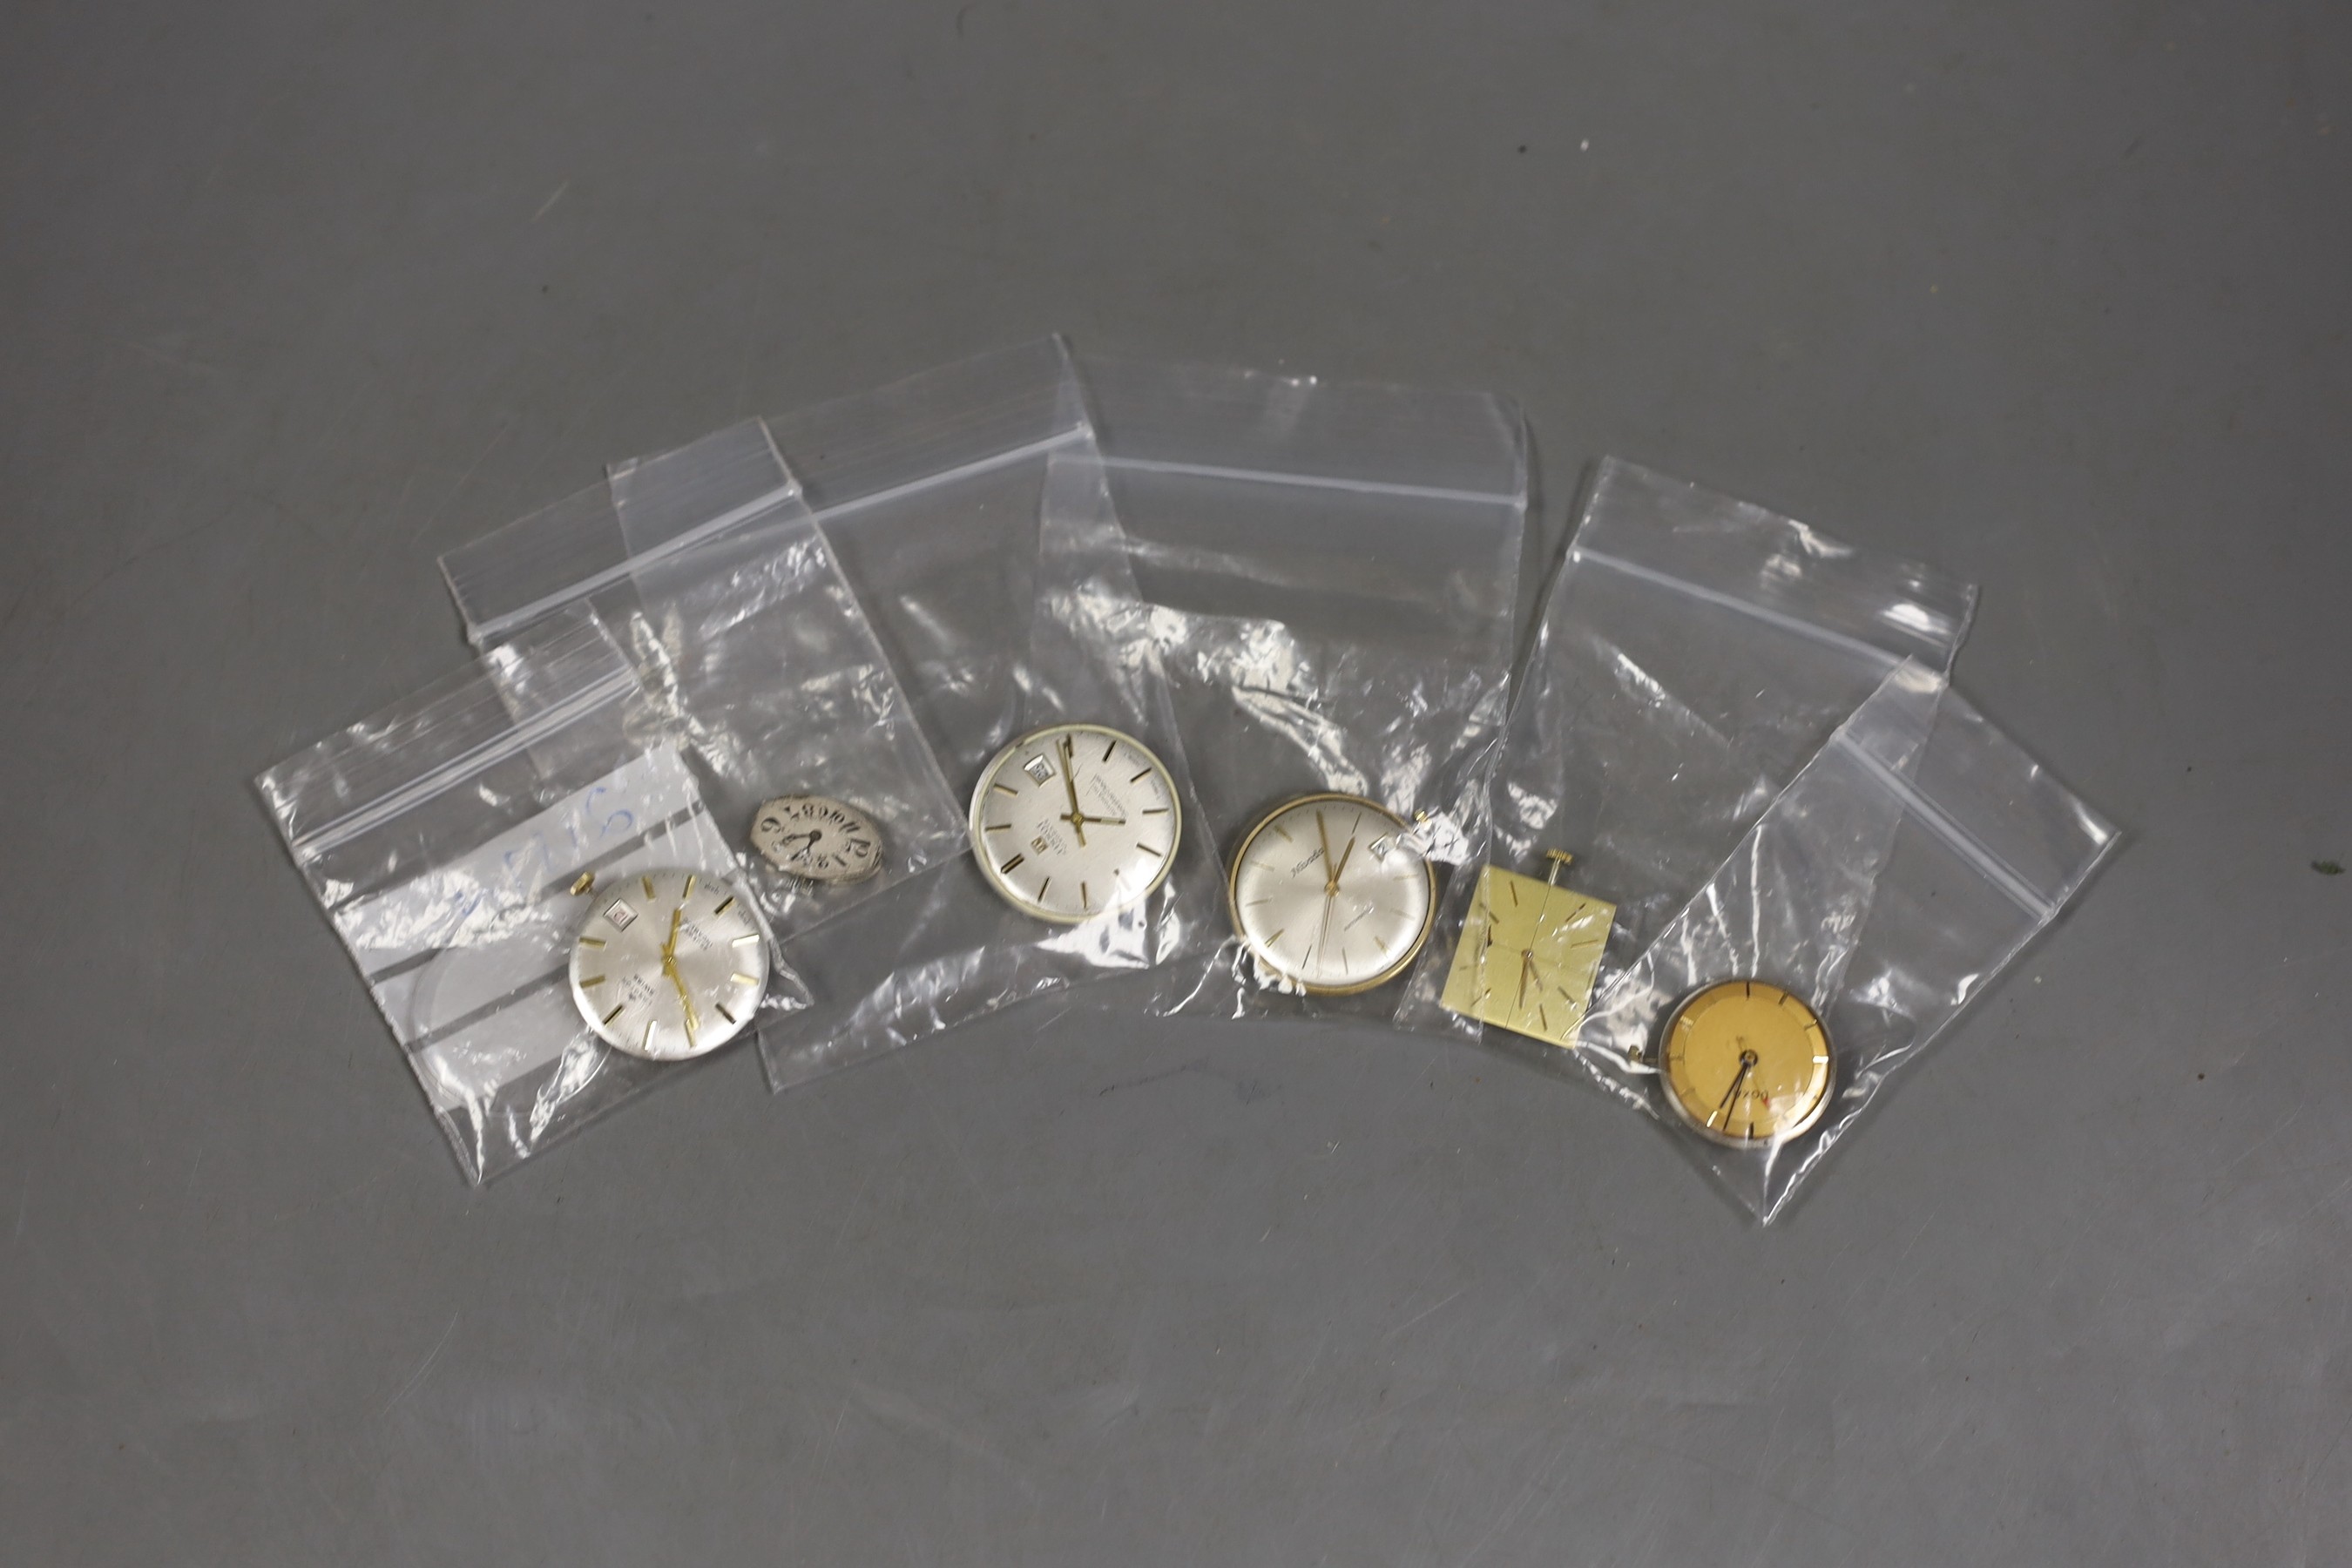 Six assorted wrist watch movements including Longines, Langton, Nivada, Tissot, Doxa and lady's oval dial.